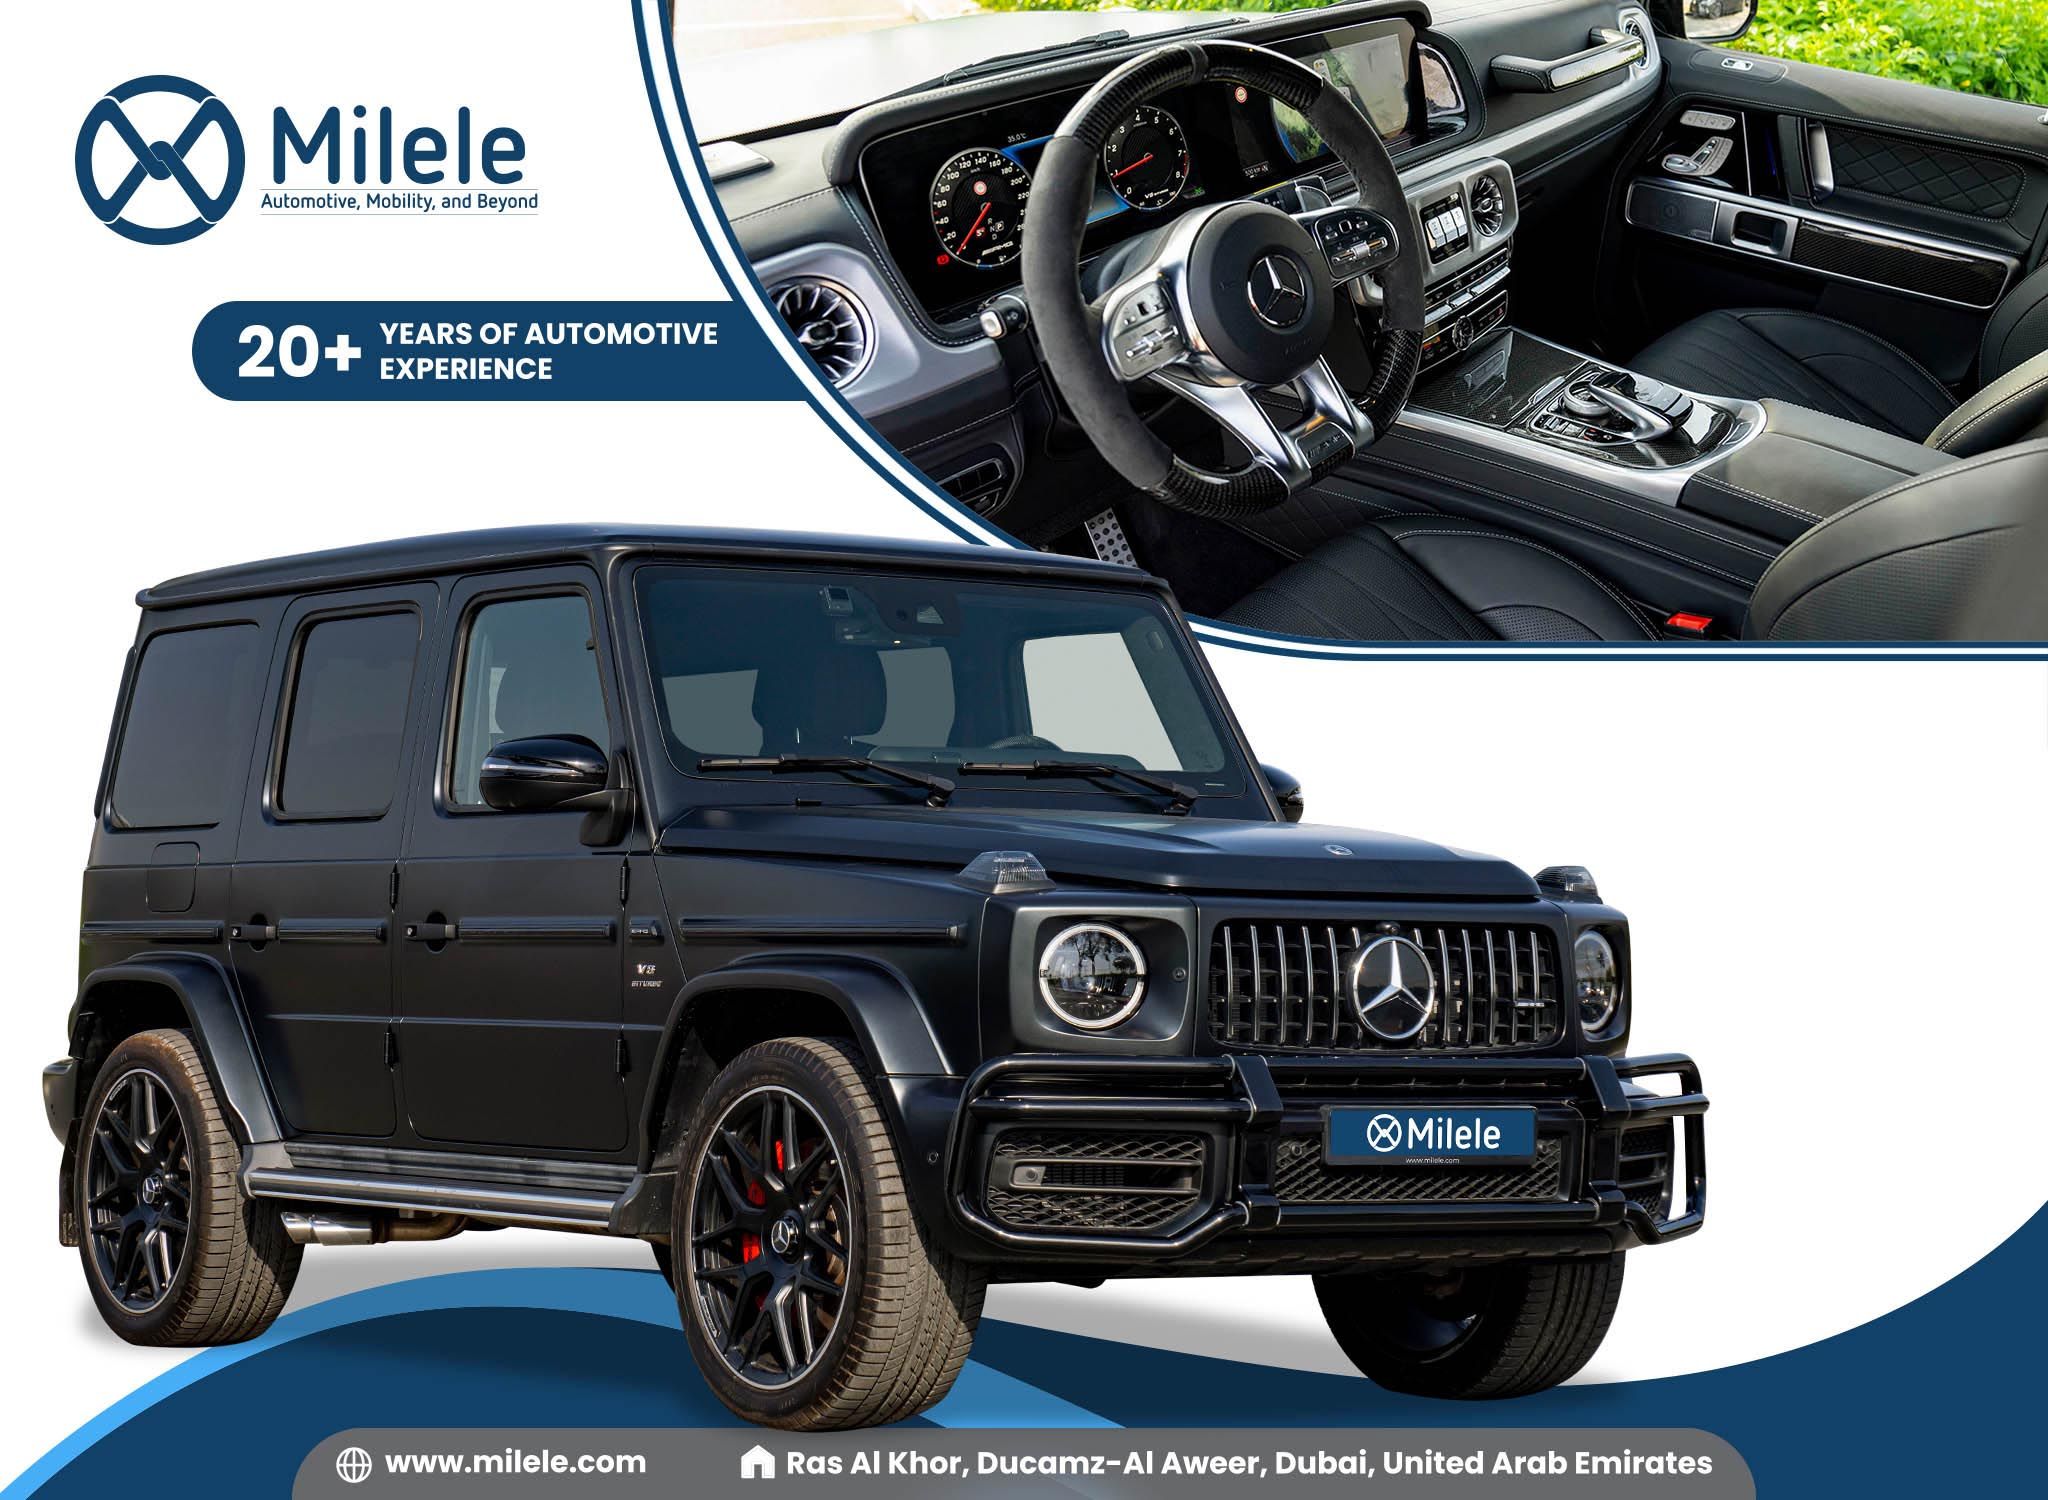 2022 MERCEDES BENZ G 63 4.0L PETROL: MAGNO BLACK WITH NIGHT PACKAGE, CARBON INTERIOR, MULTIBEAM LED